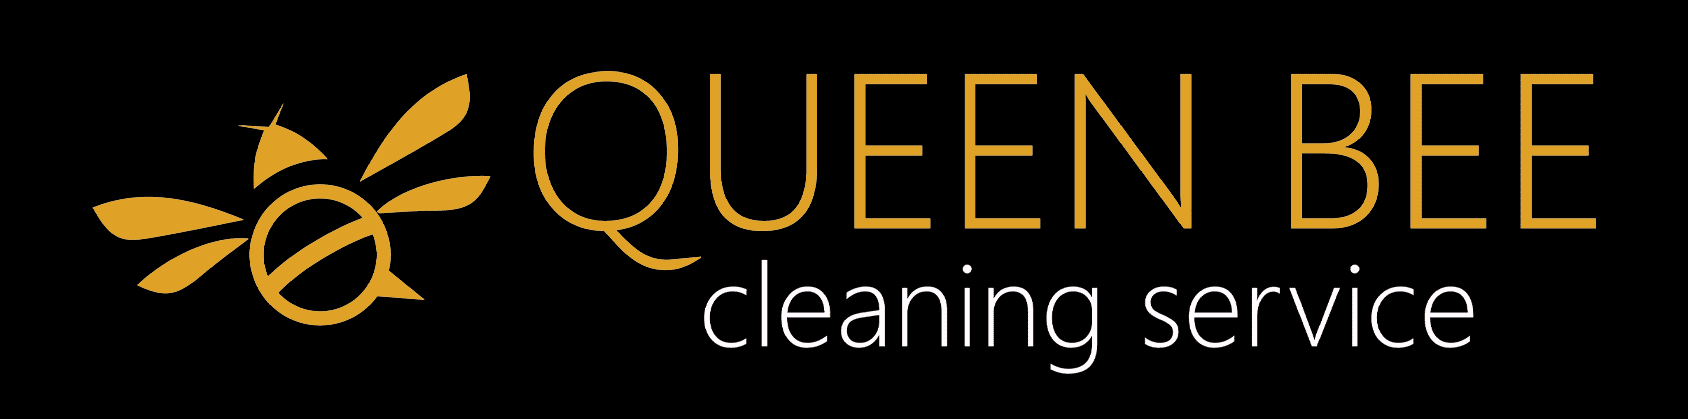 The Queen Bee cleaning business logo